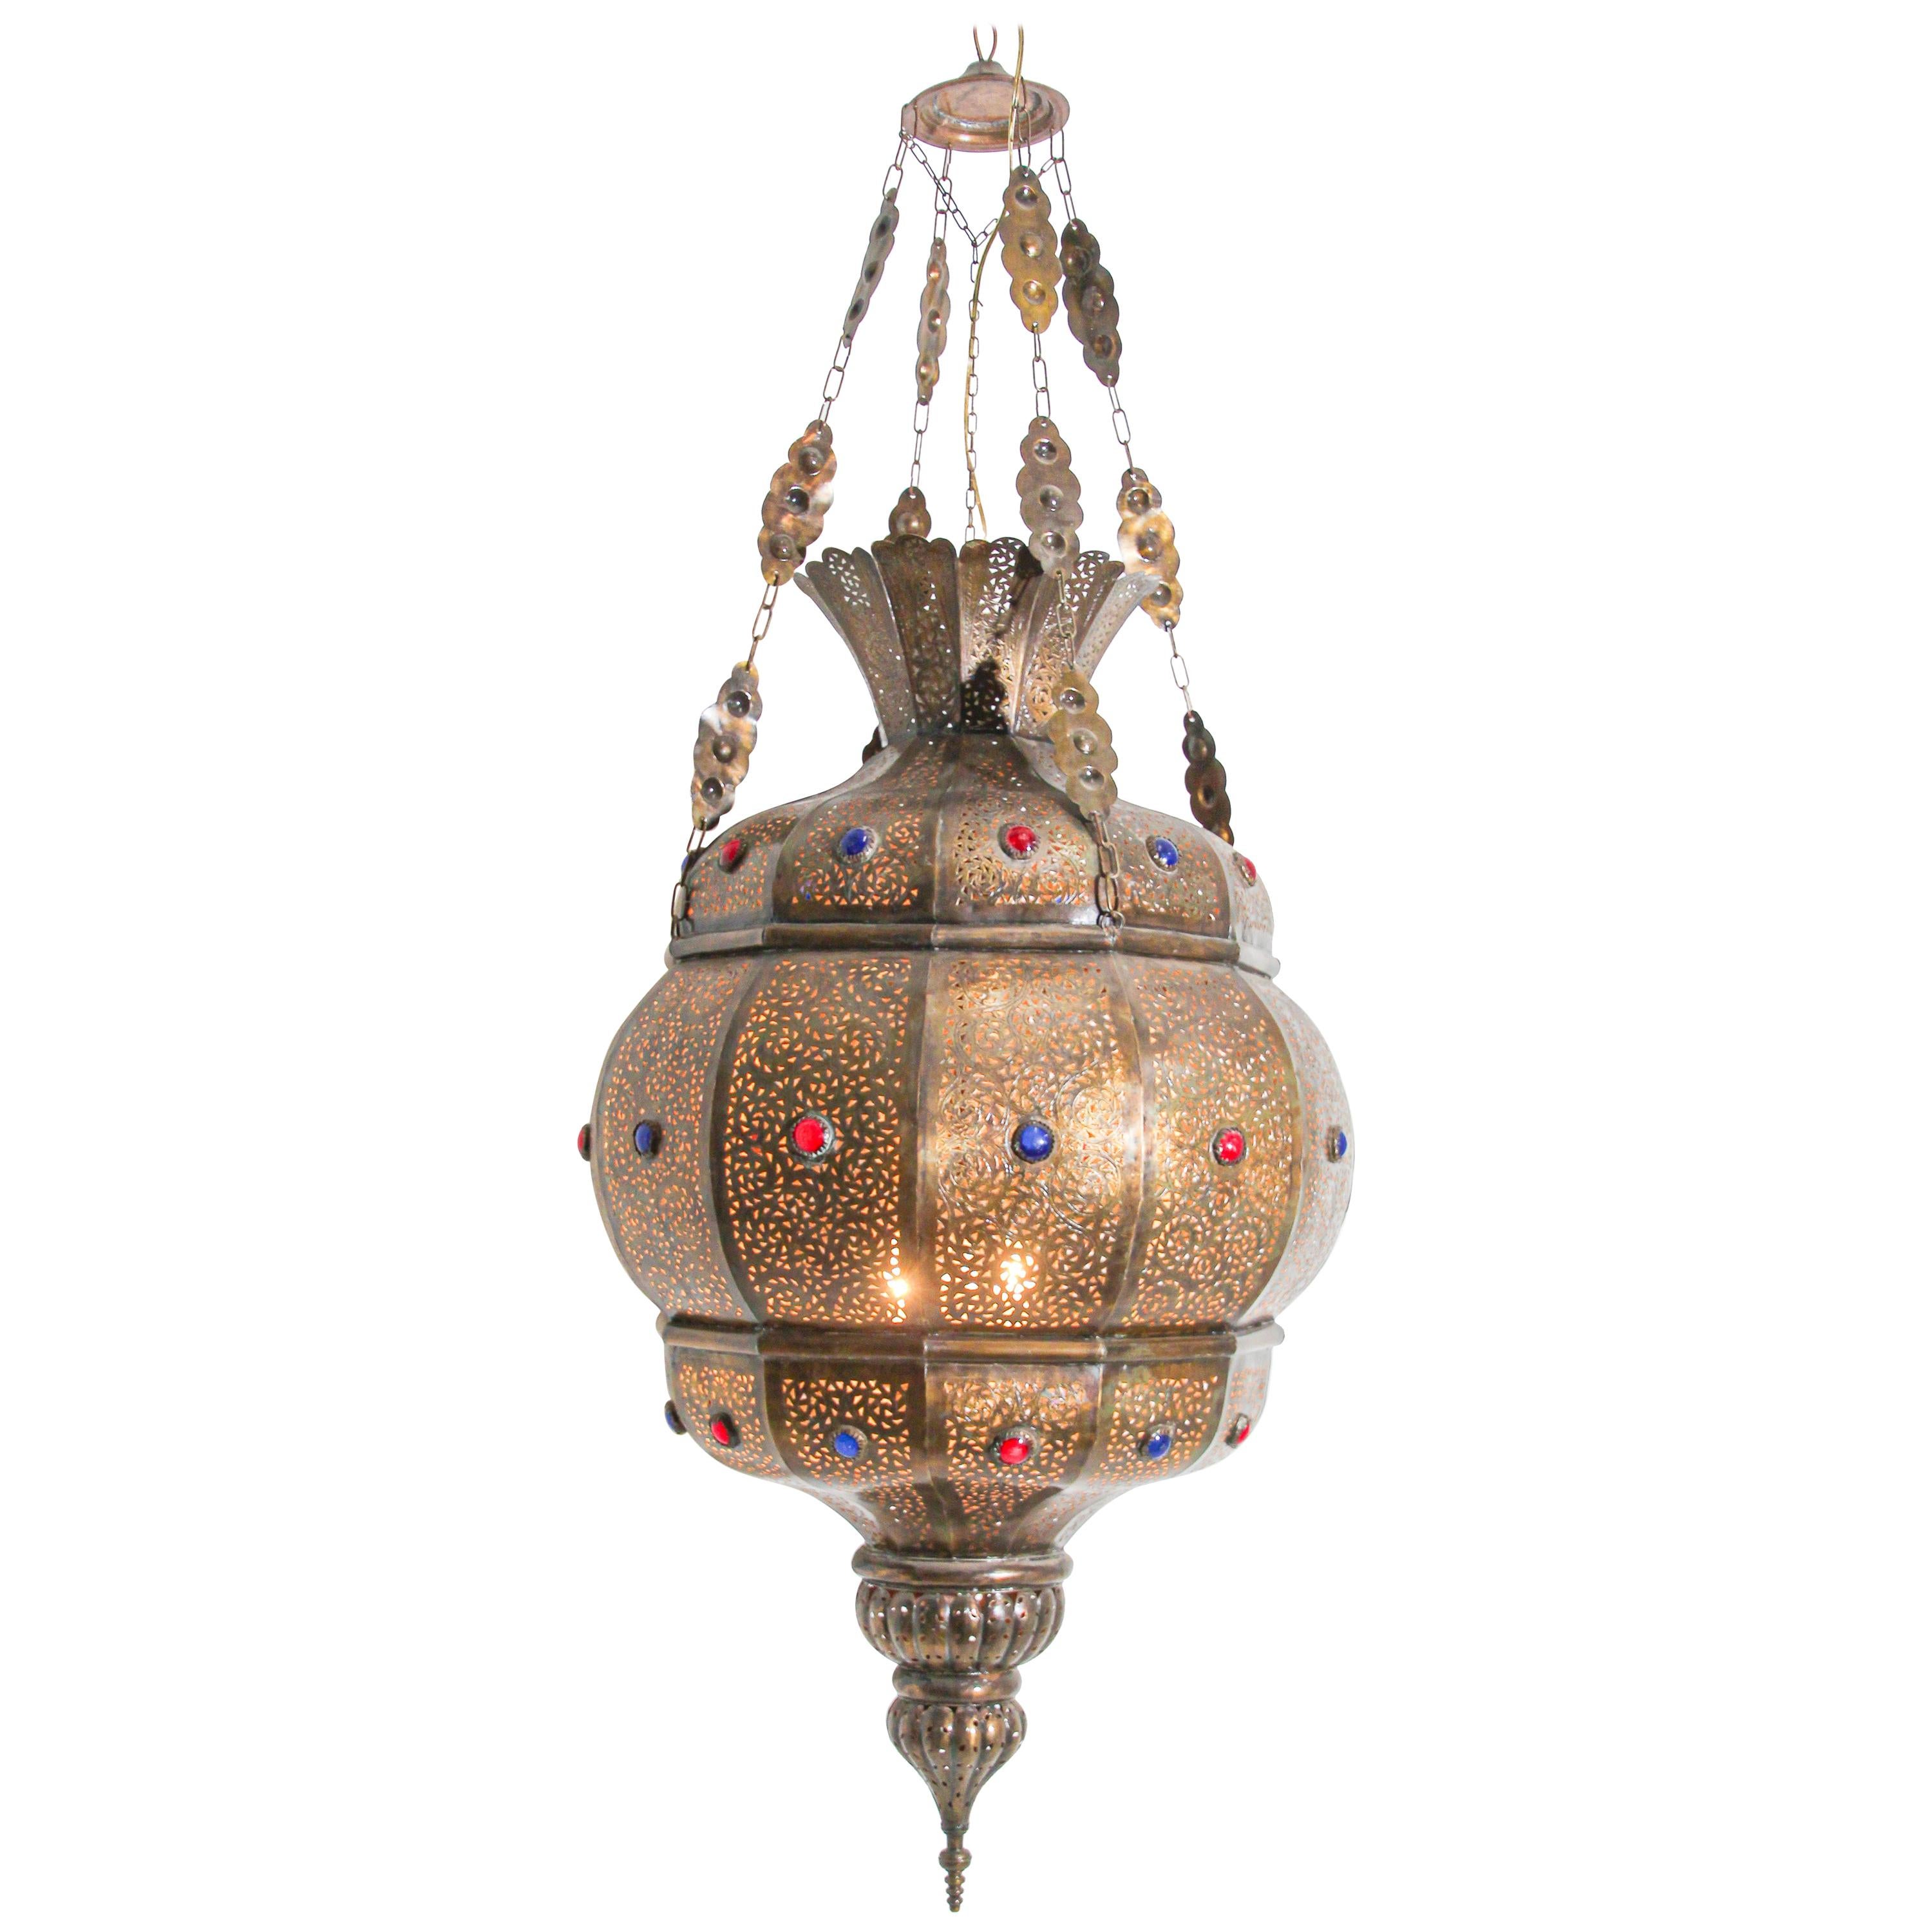 Details about   Handcrafted Moroccan Jeweled Matte Gold Brass Ceiling light Fixture Lamp Lantern 